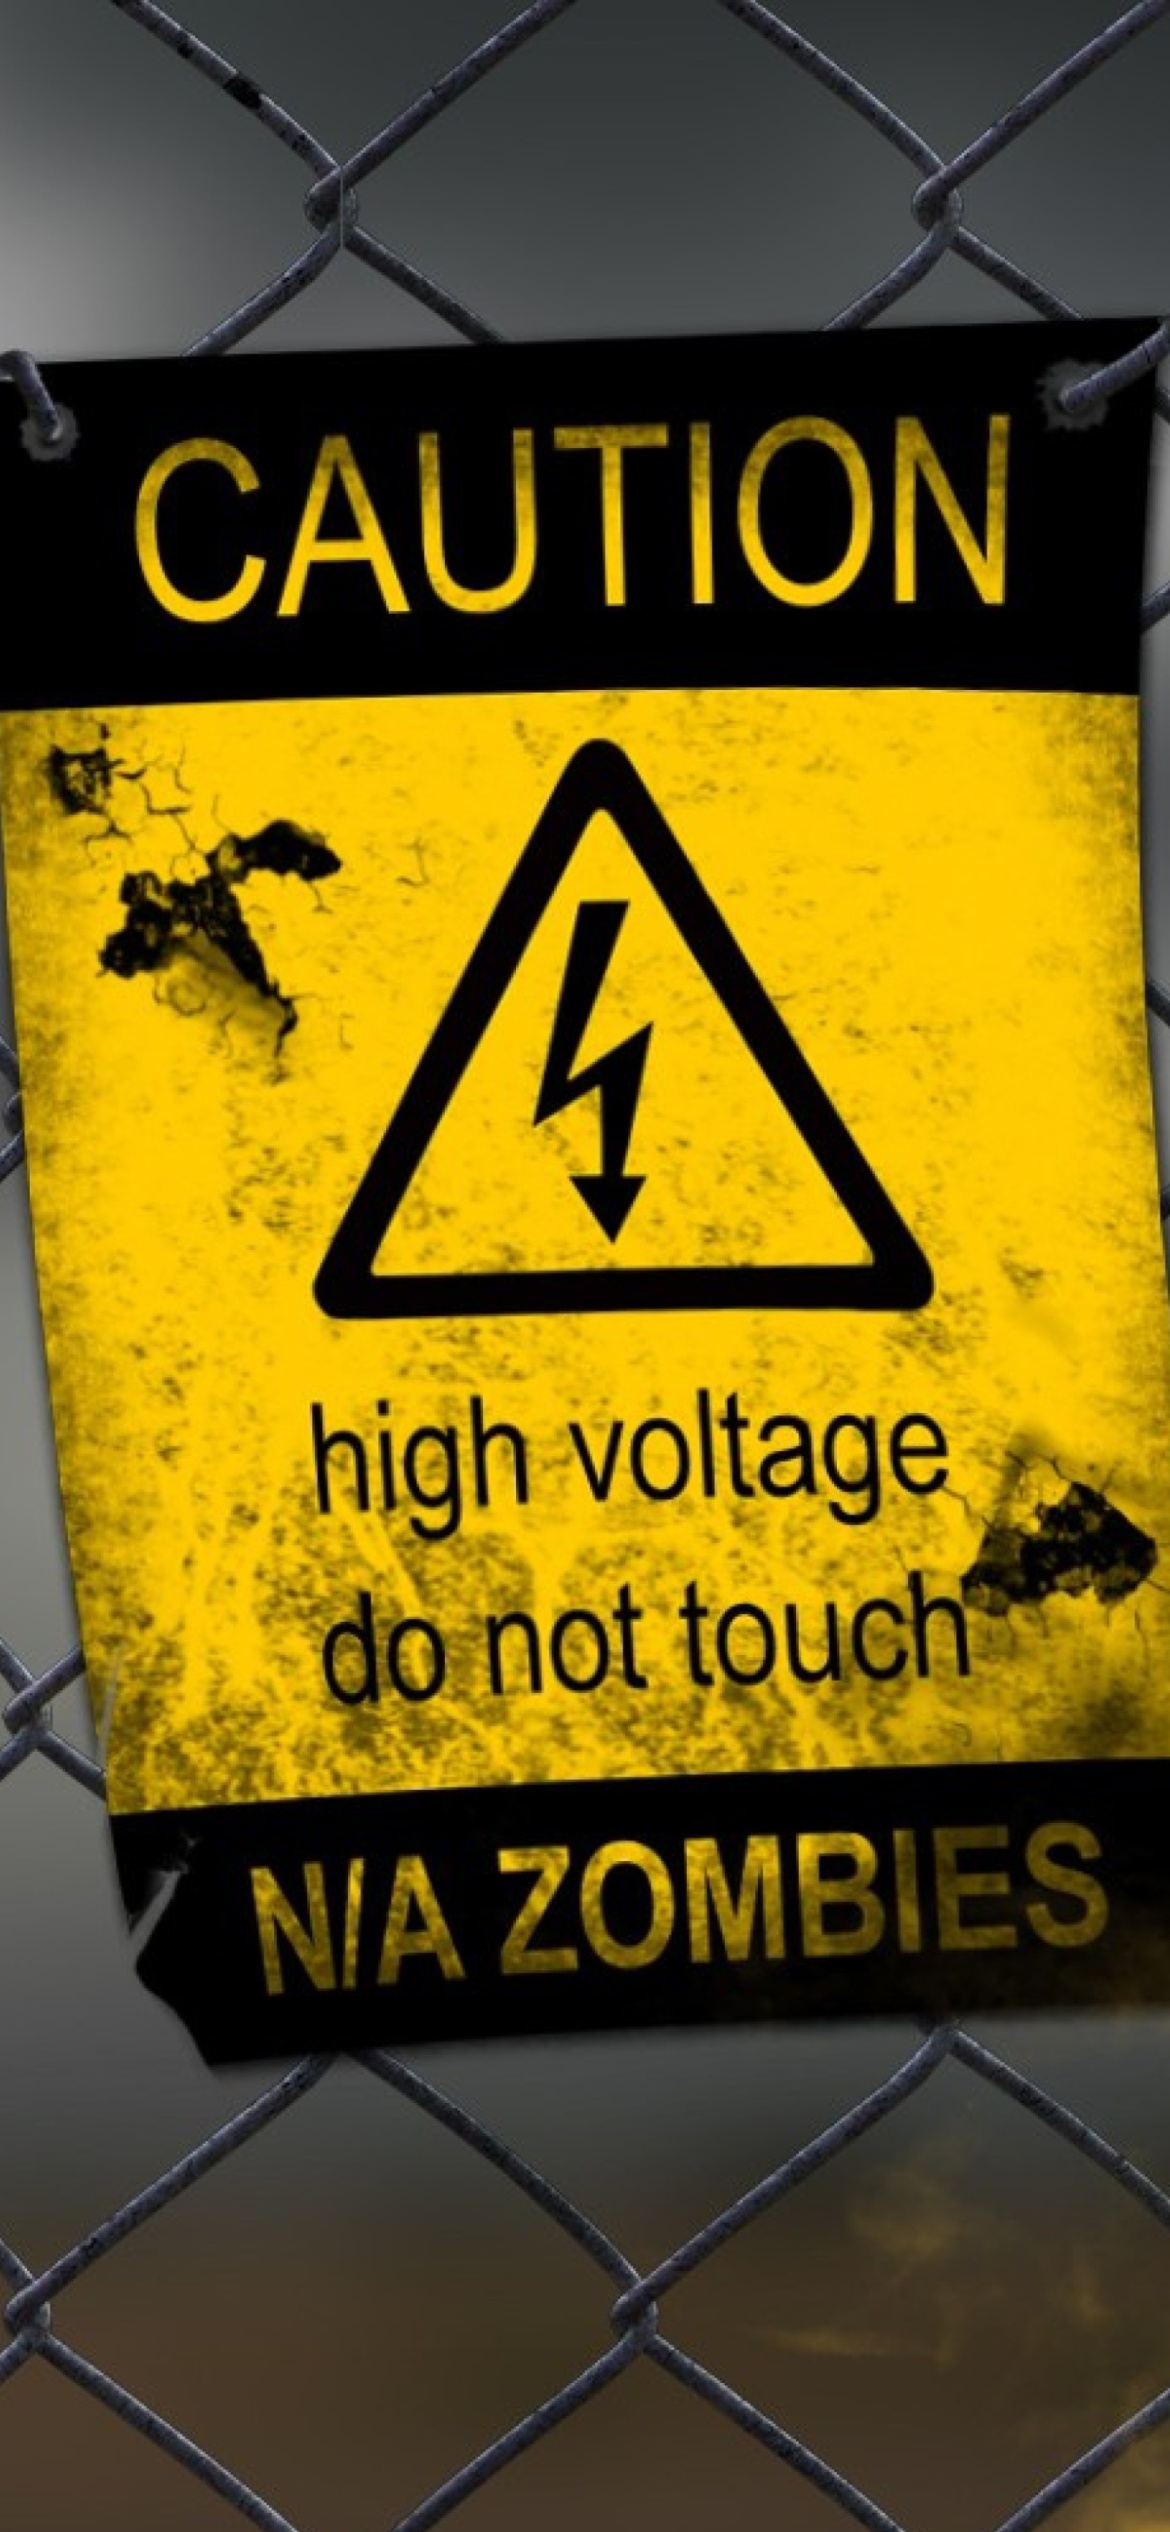 Caution Zombies, High voltage do not touch wallpaper 1170x2532